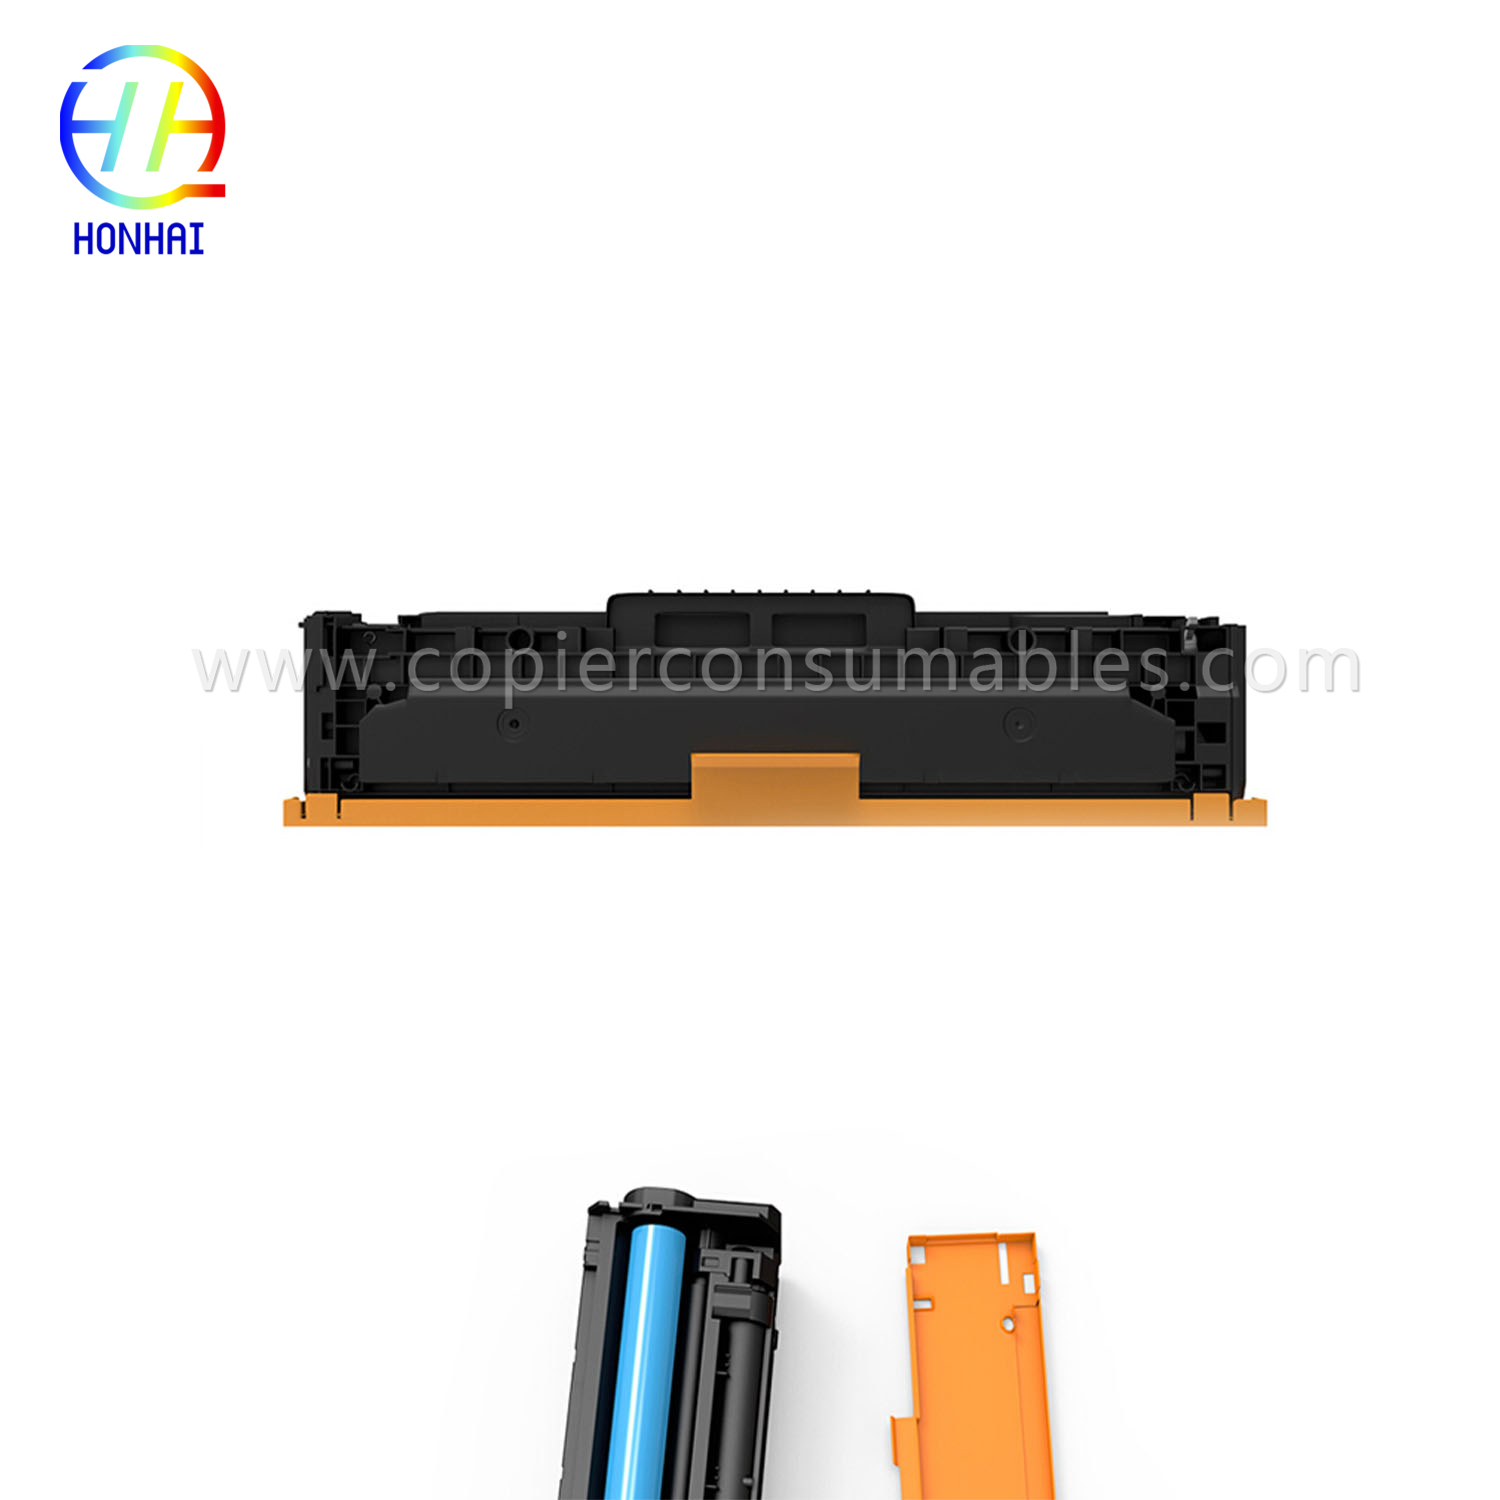 Toner Cartridge for HP Laserjet PRO 200 Color M251nw Mfp M276nw (CF212A CF213A) (3) 拷贝